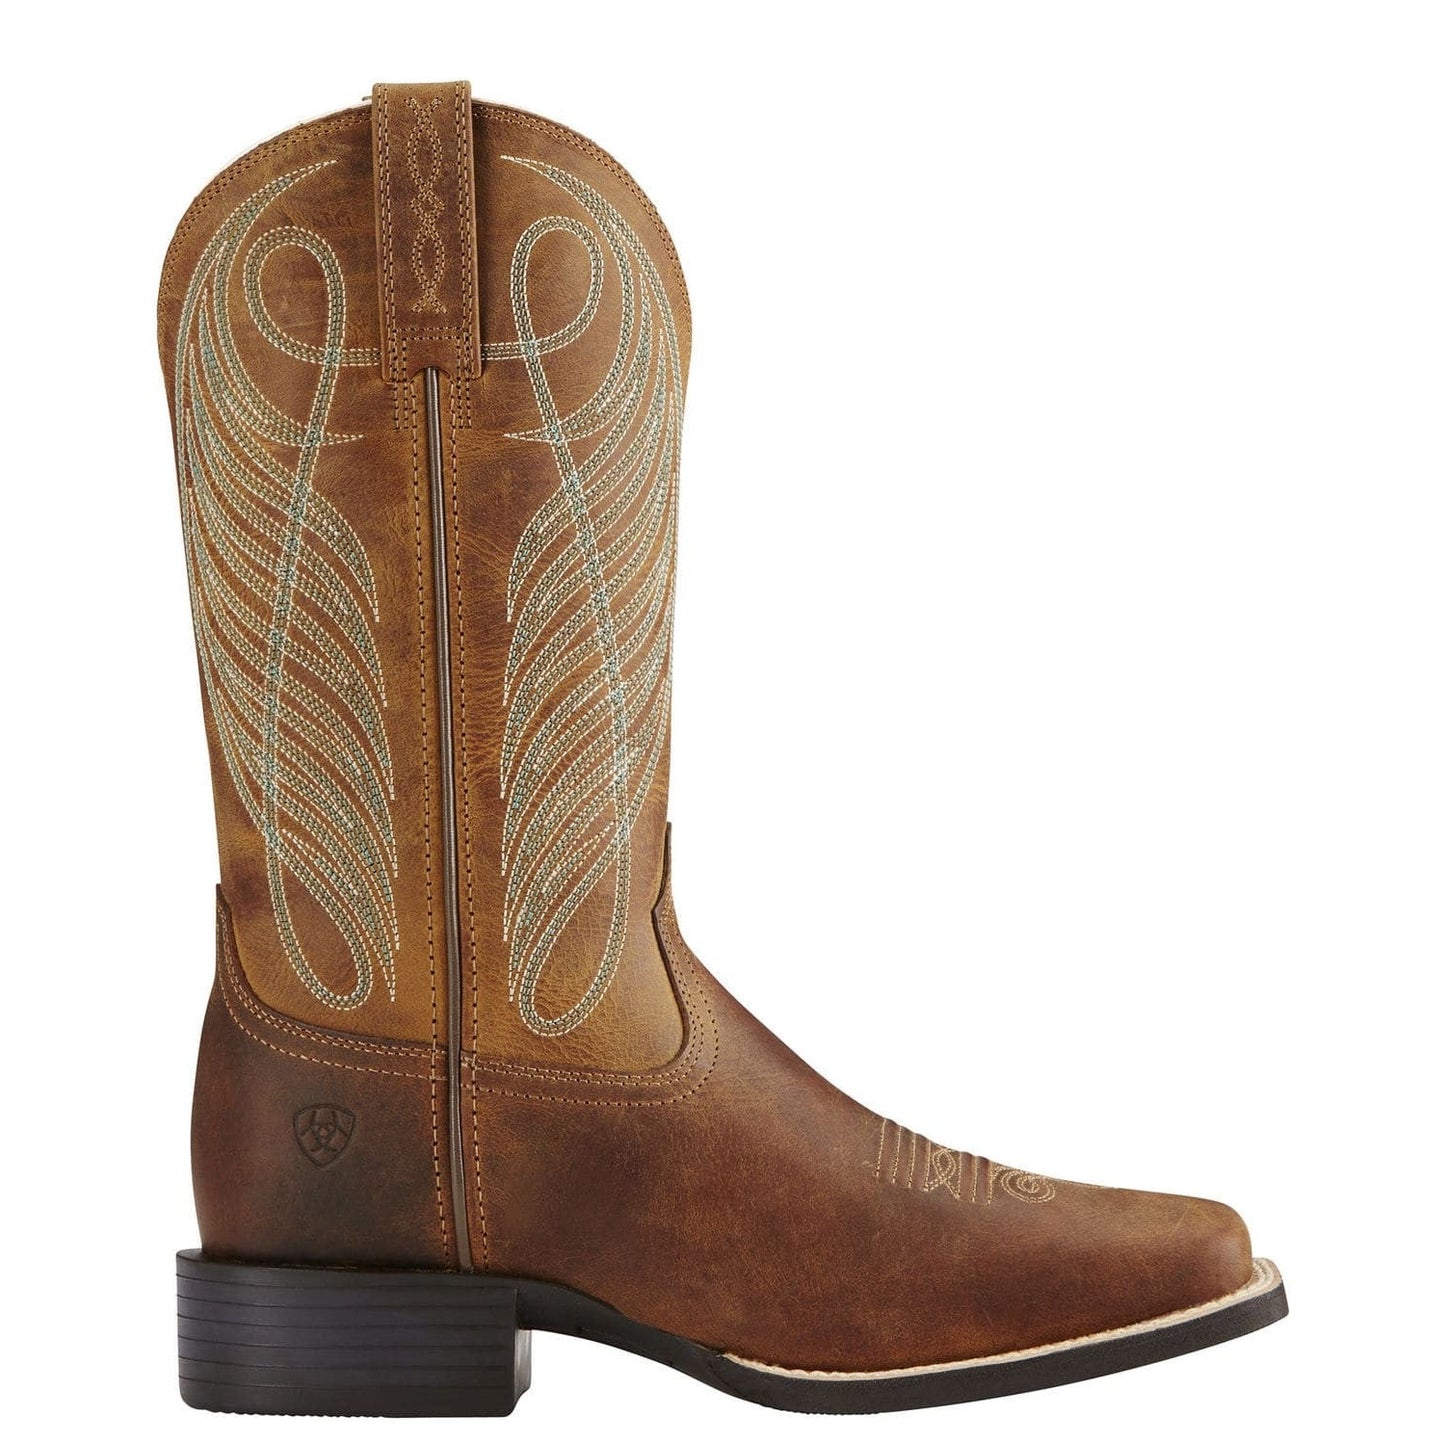 Ariat Ladies Round Up Wide Square Toe Powder Brown Boot 10018528 - Wild West Boot Store